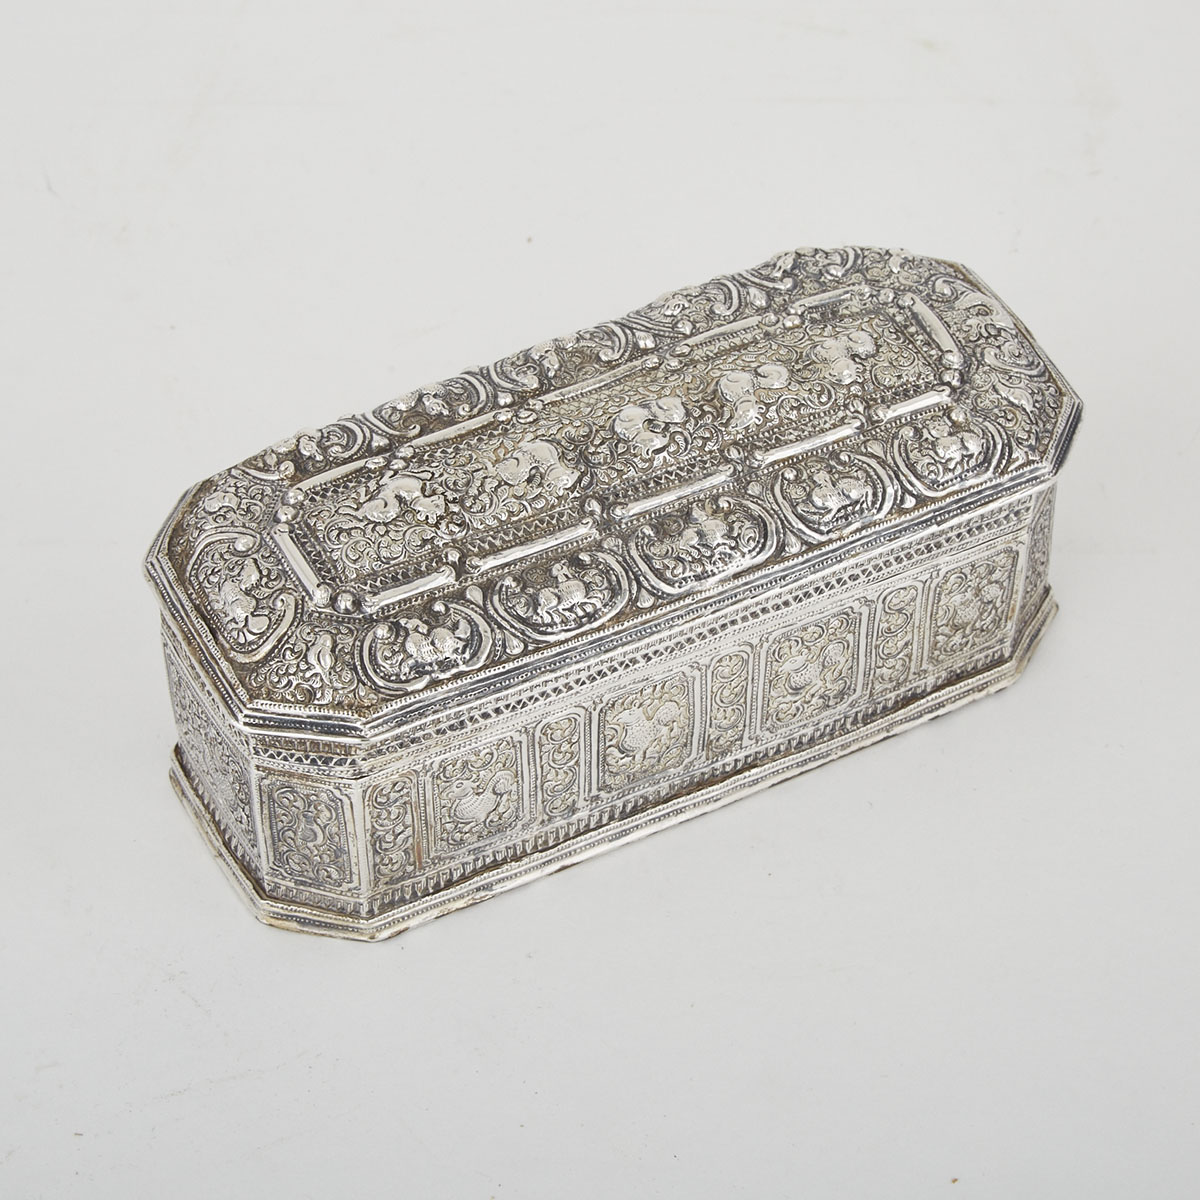 Burmese Silver Octagonal Covered Box, late 19th century